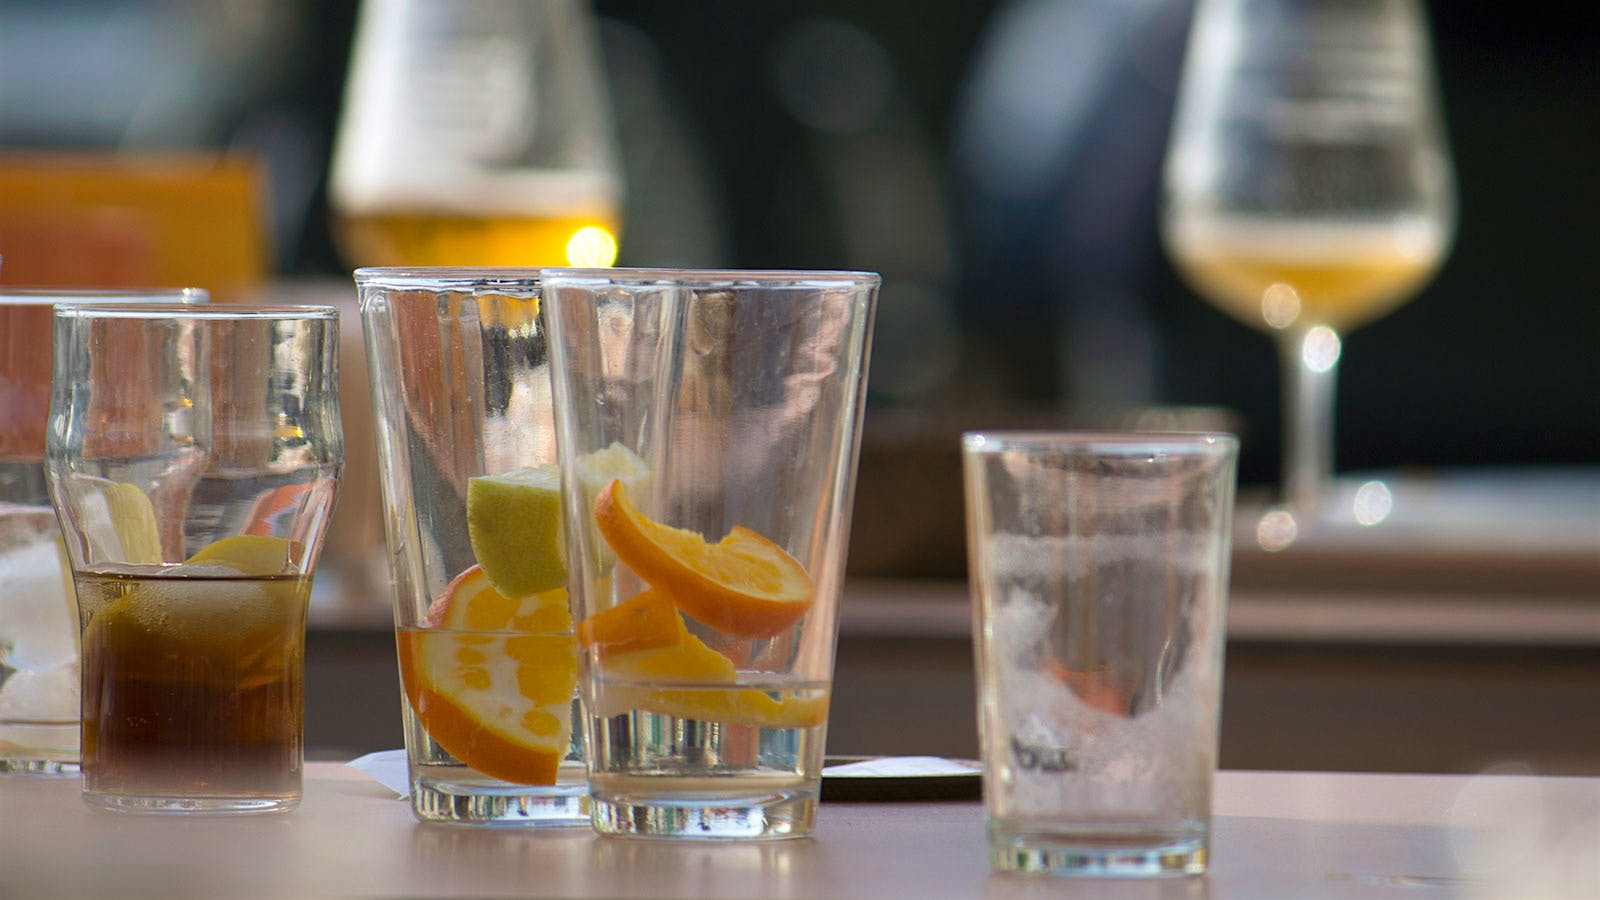 Study Finds Binge Drinking by Younger Adults a Key Factor in Alcohol-Related Deaths